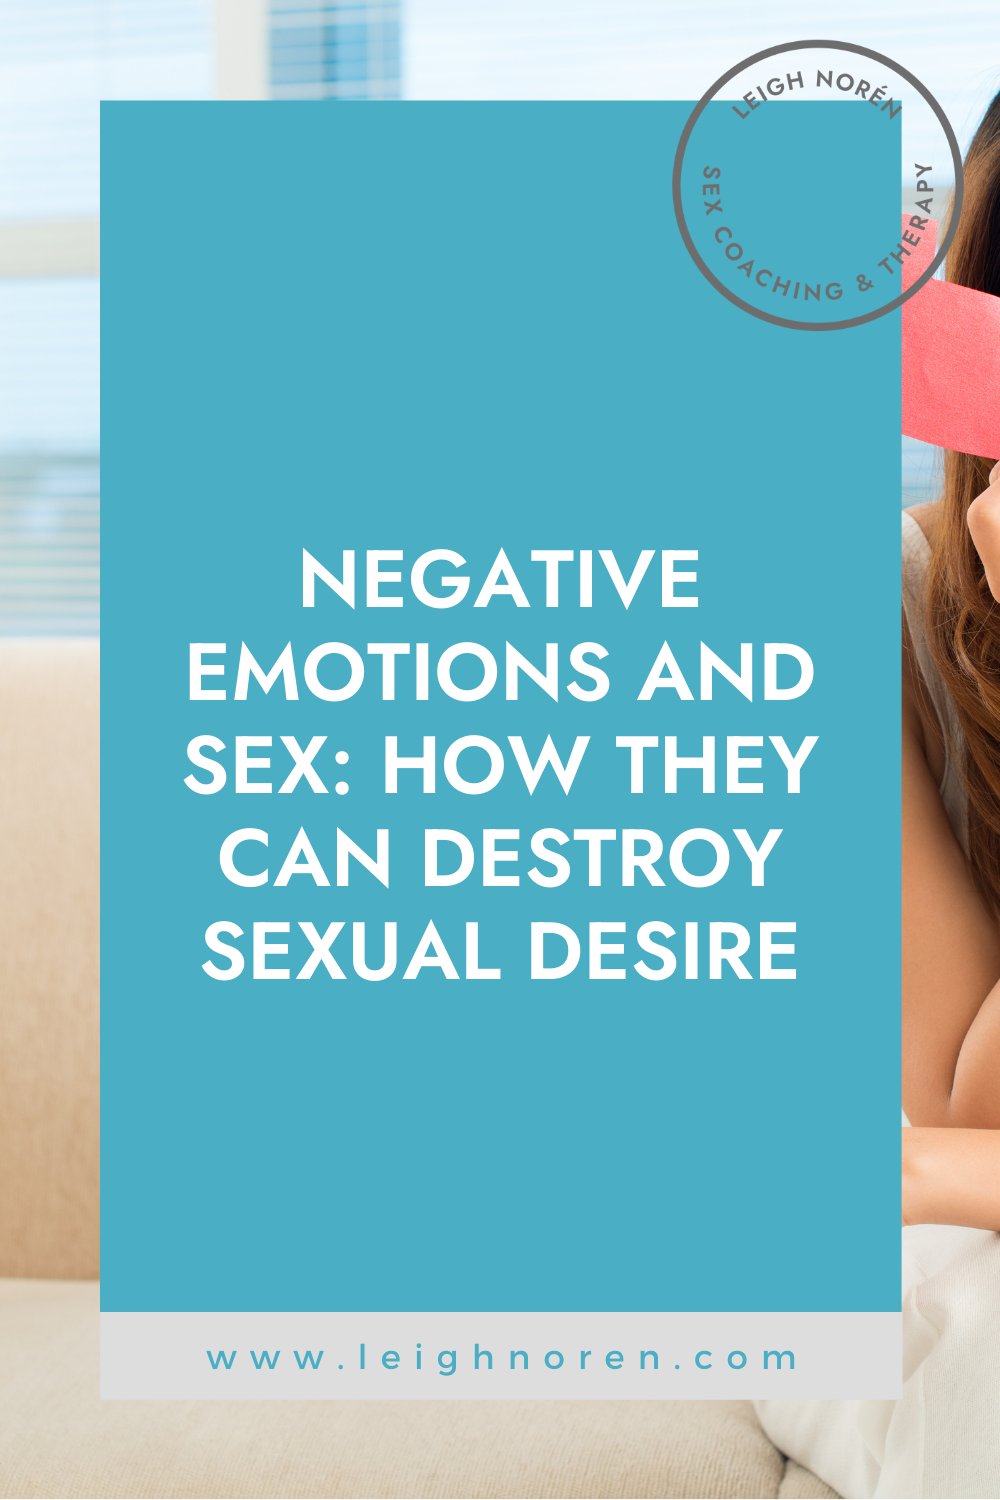 Negative Emotions And Sex: How They Can Destroy Sexual Desire